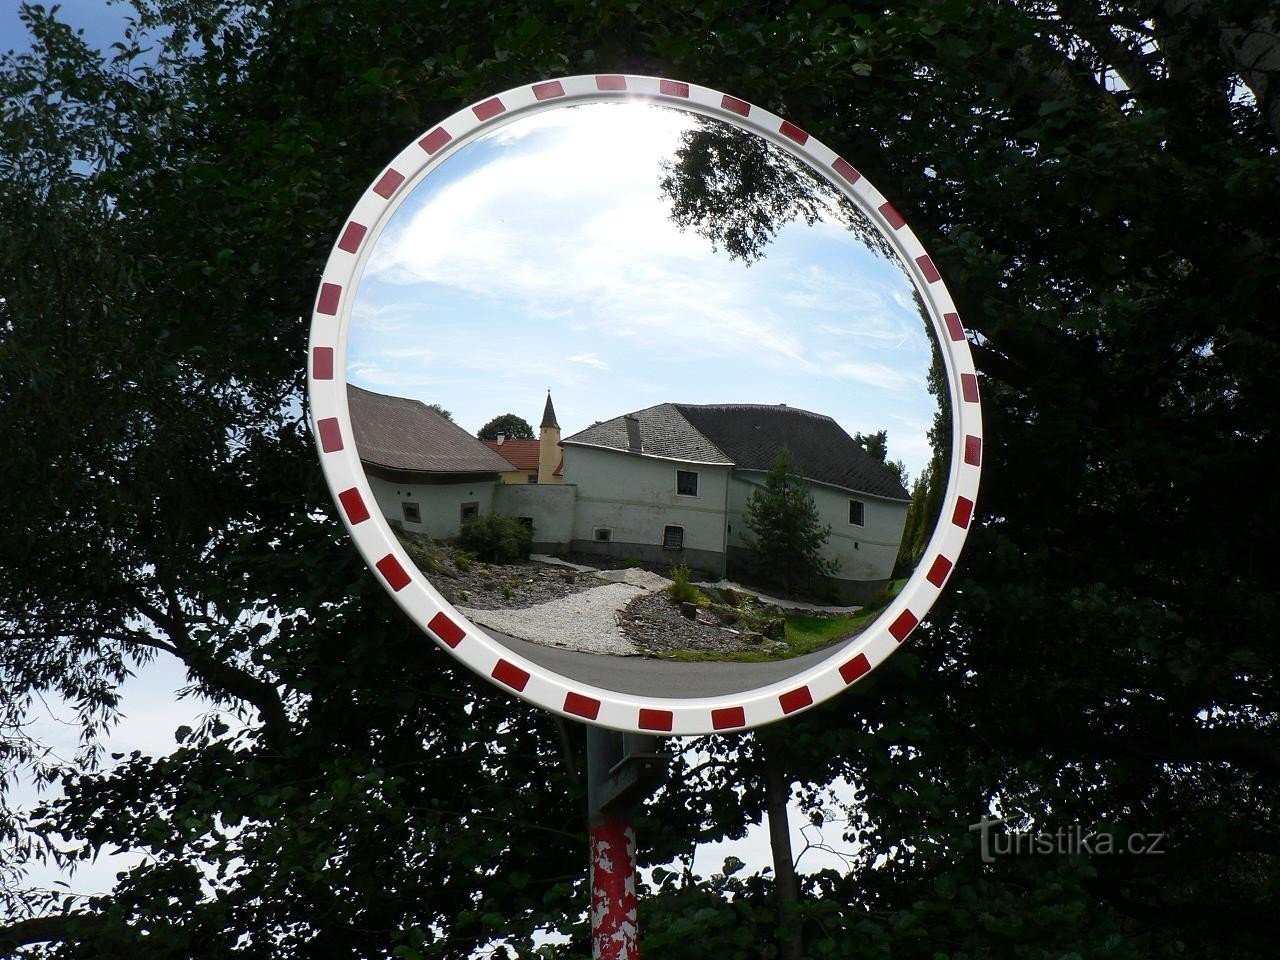 Jindřichovice, castles in the mirror